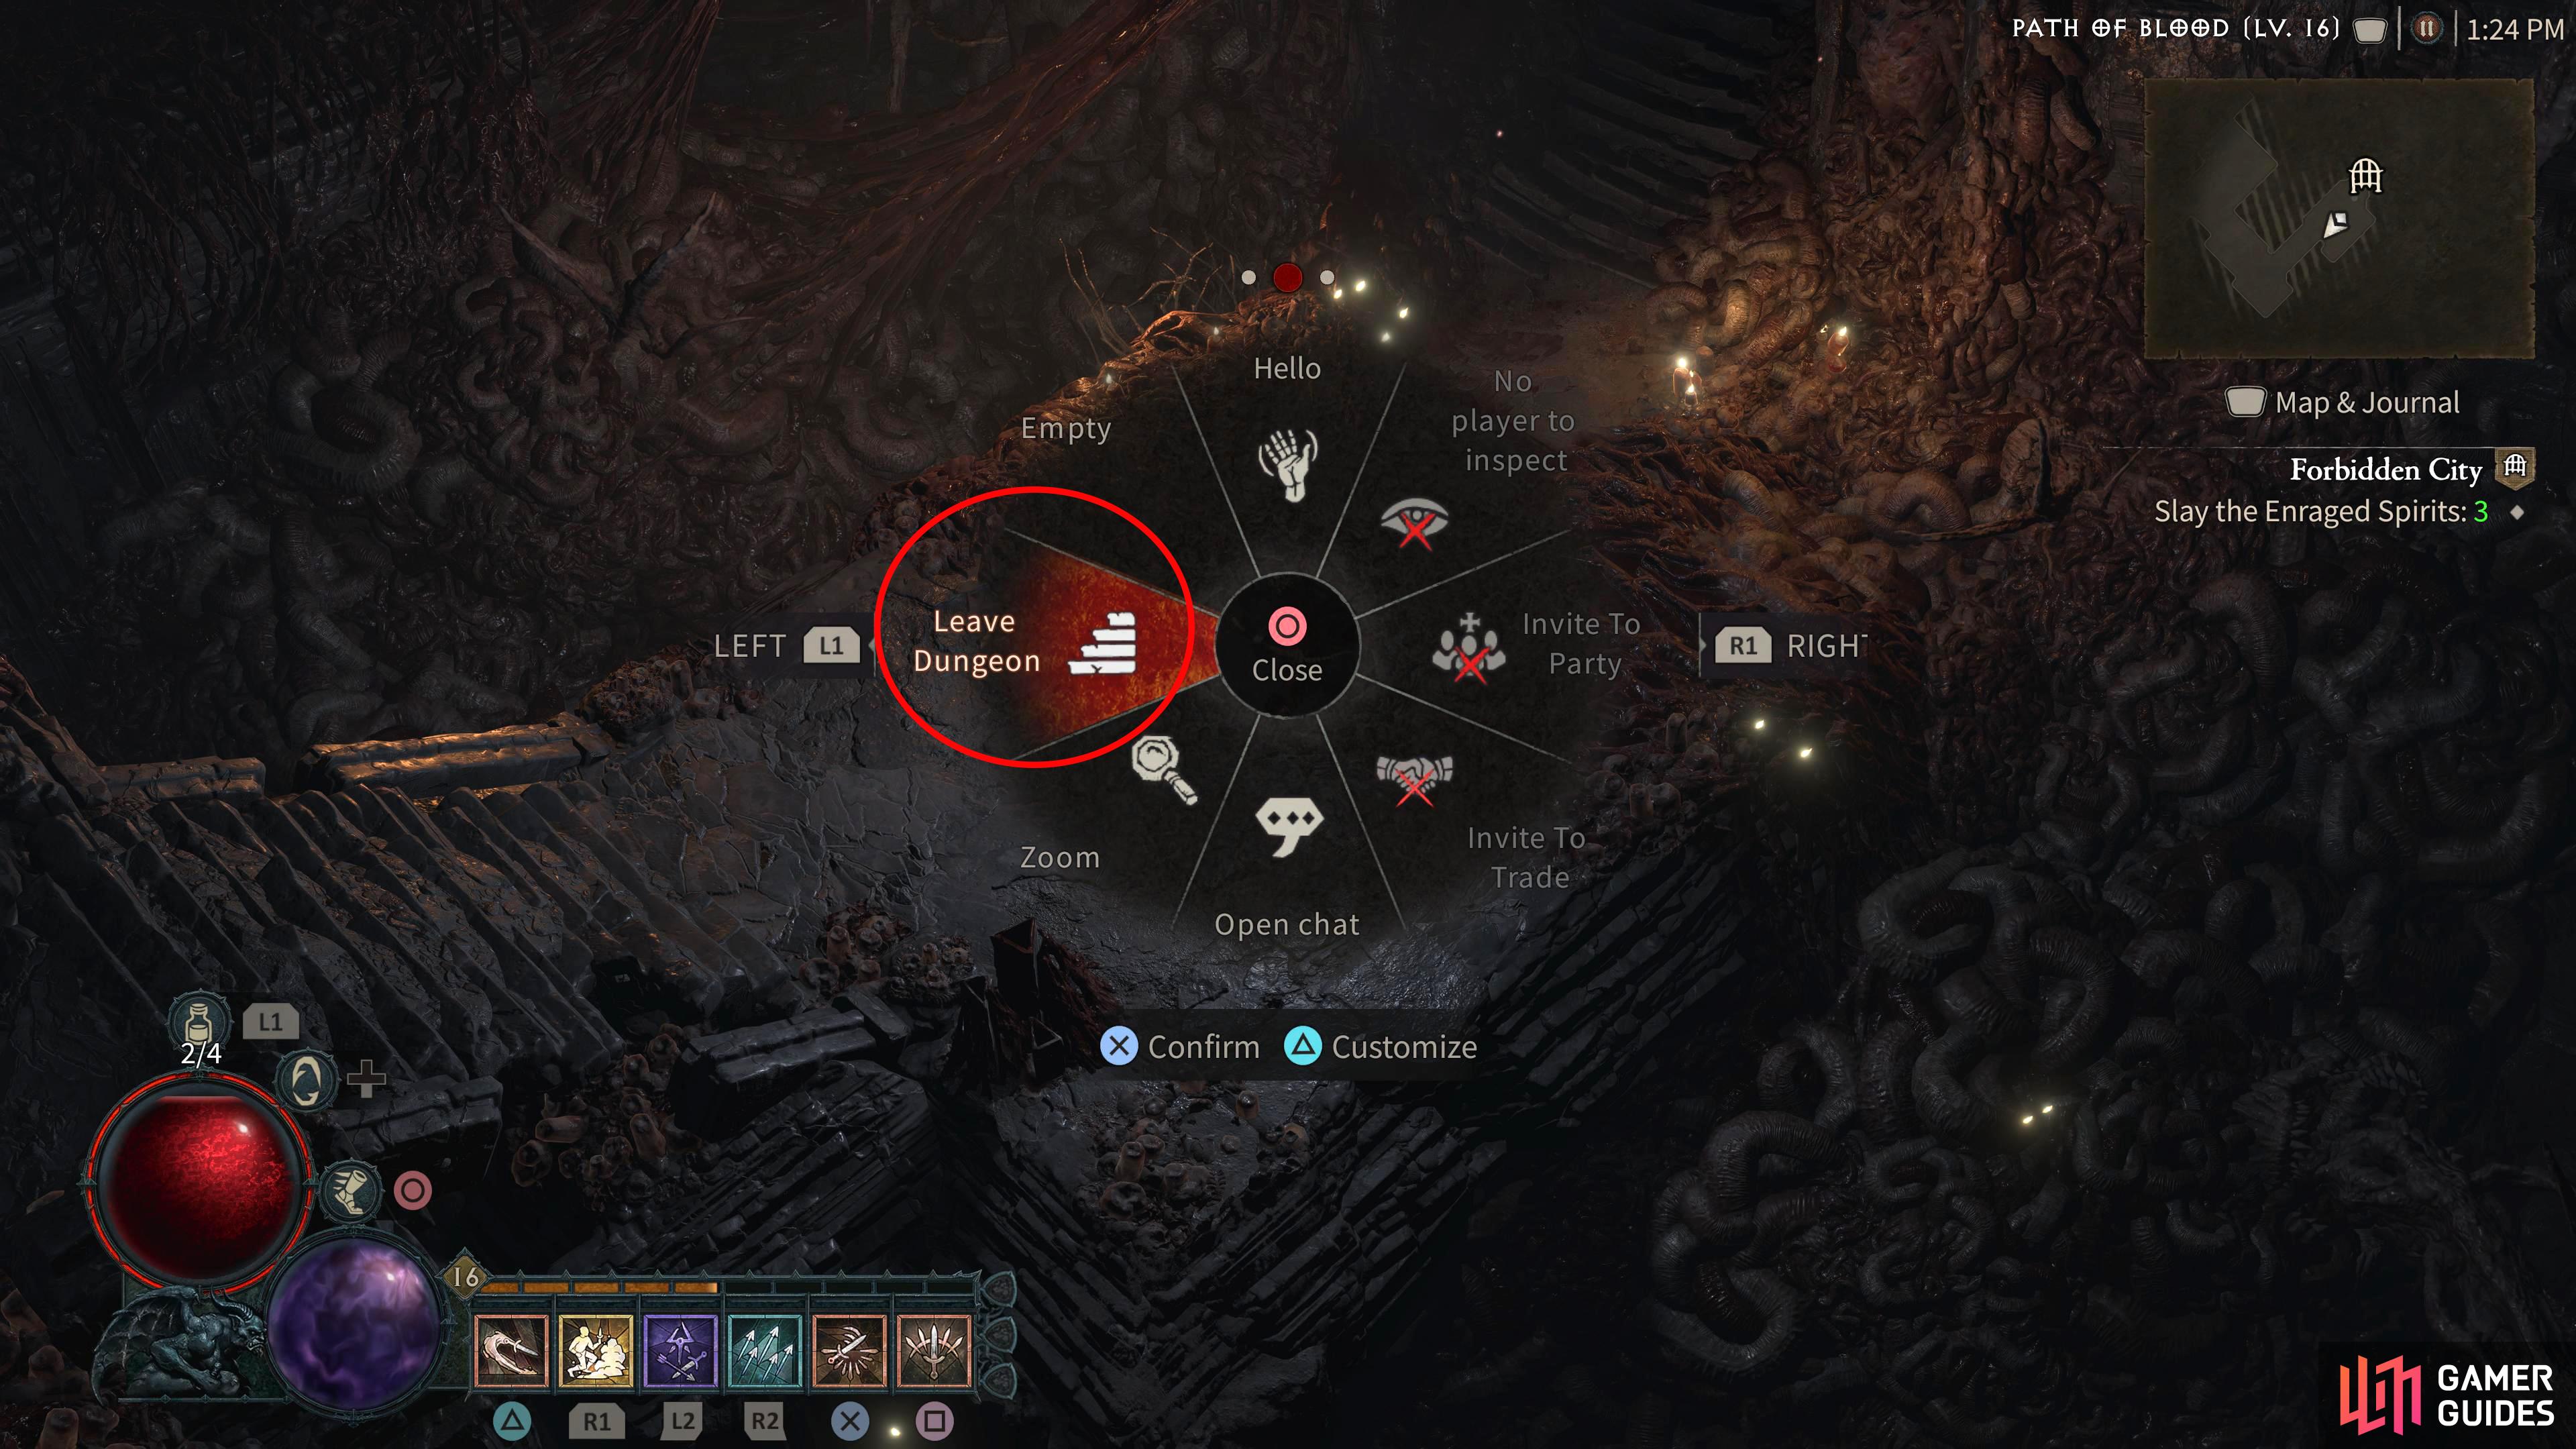 In larger maps, you may want to use the "Leave Dungeon" shortcut in the Action Wheel.